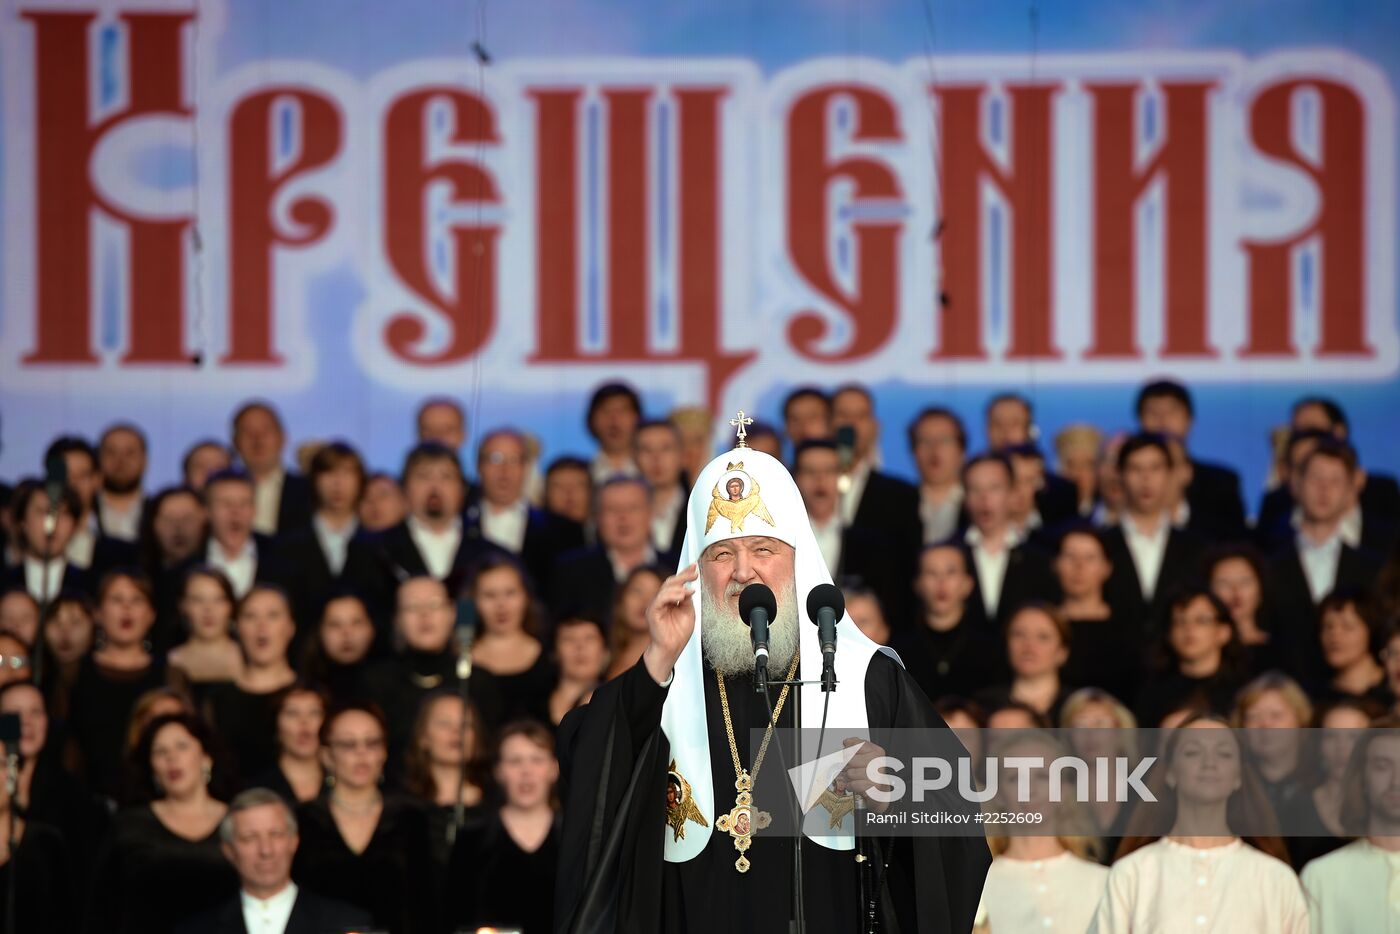 Gala concert marks 1025th anniversary of Russia's Baptism